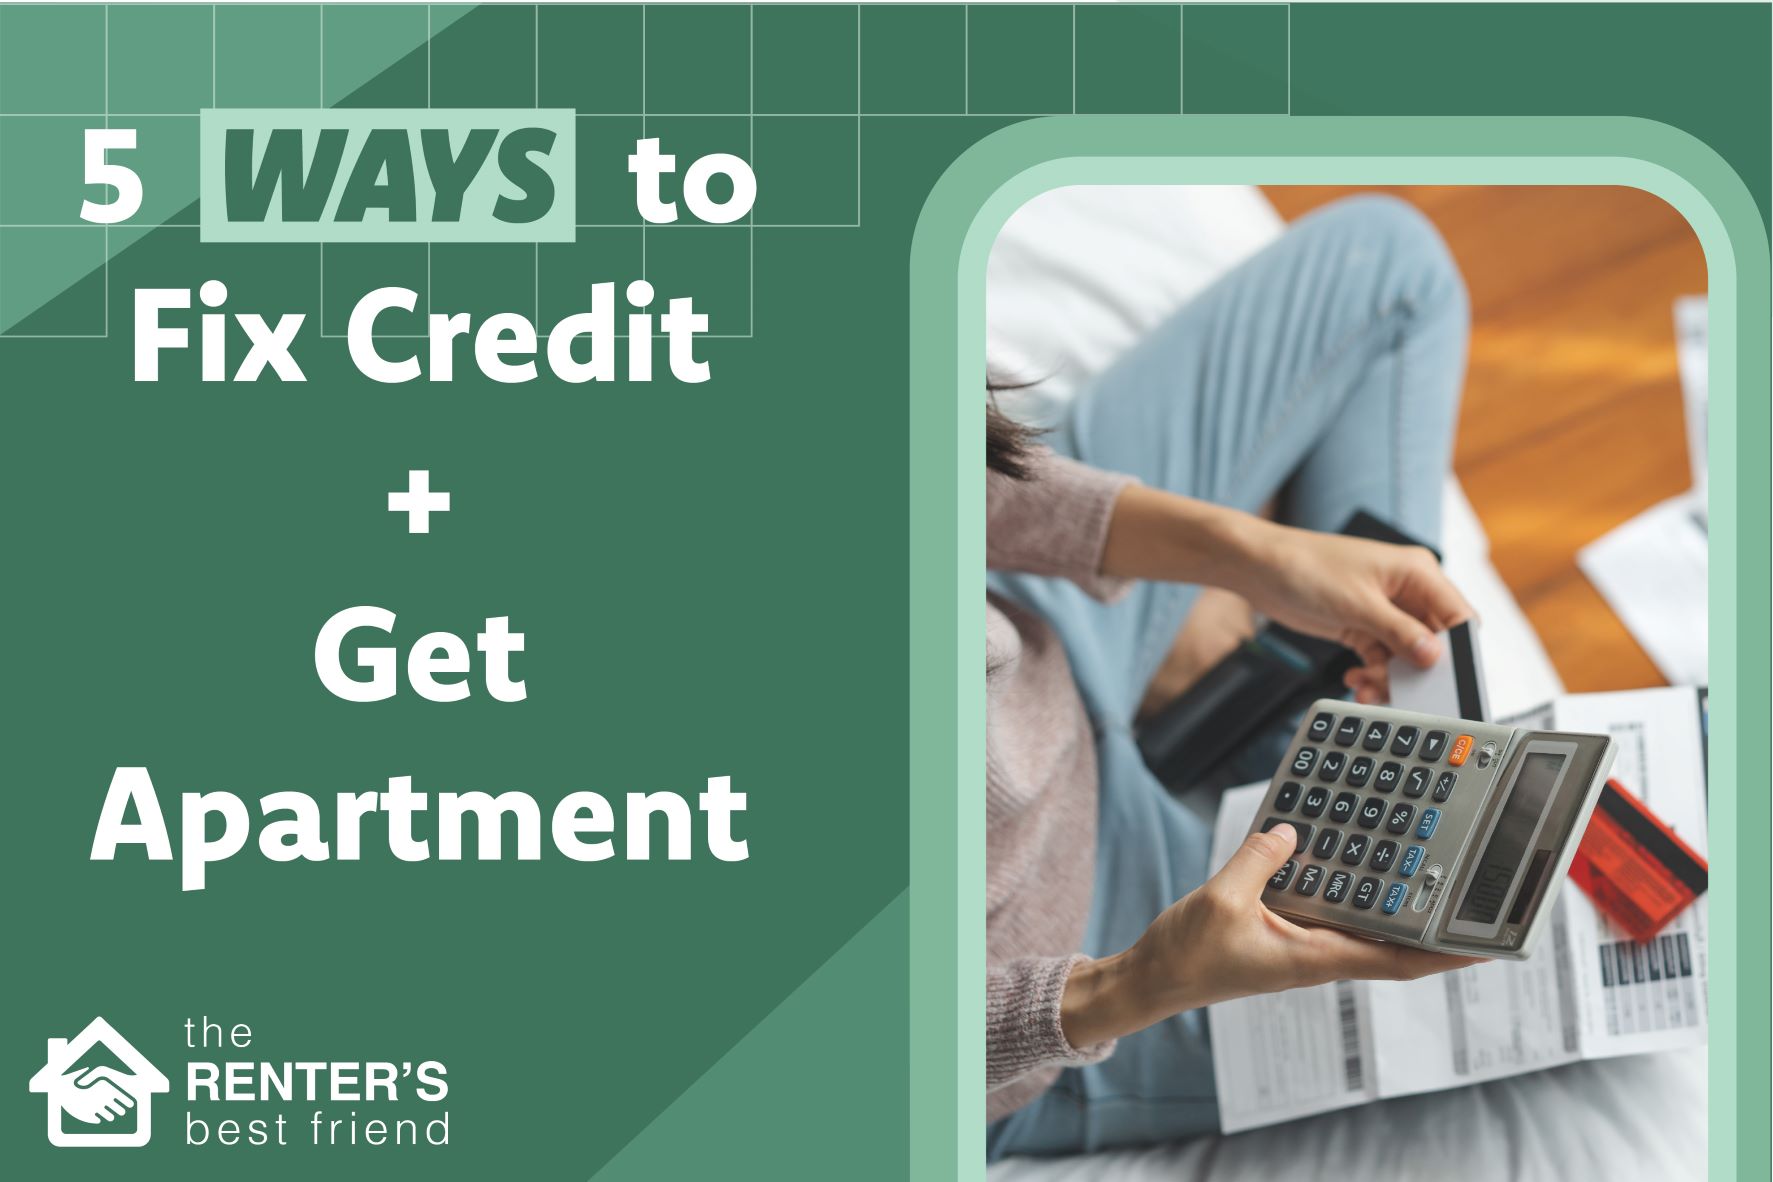 5 ways to fix your credit to get an apartment